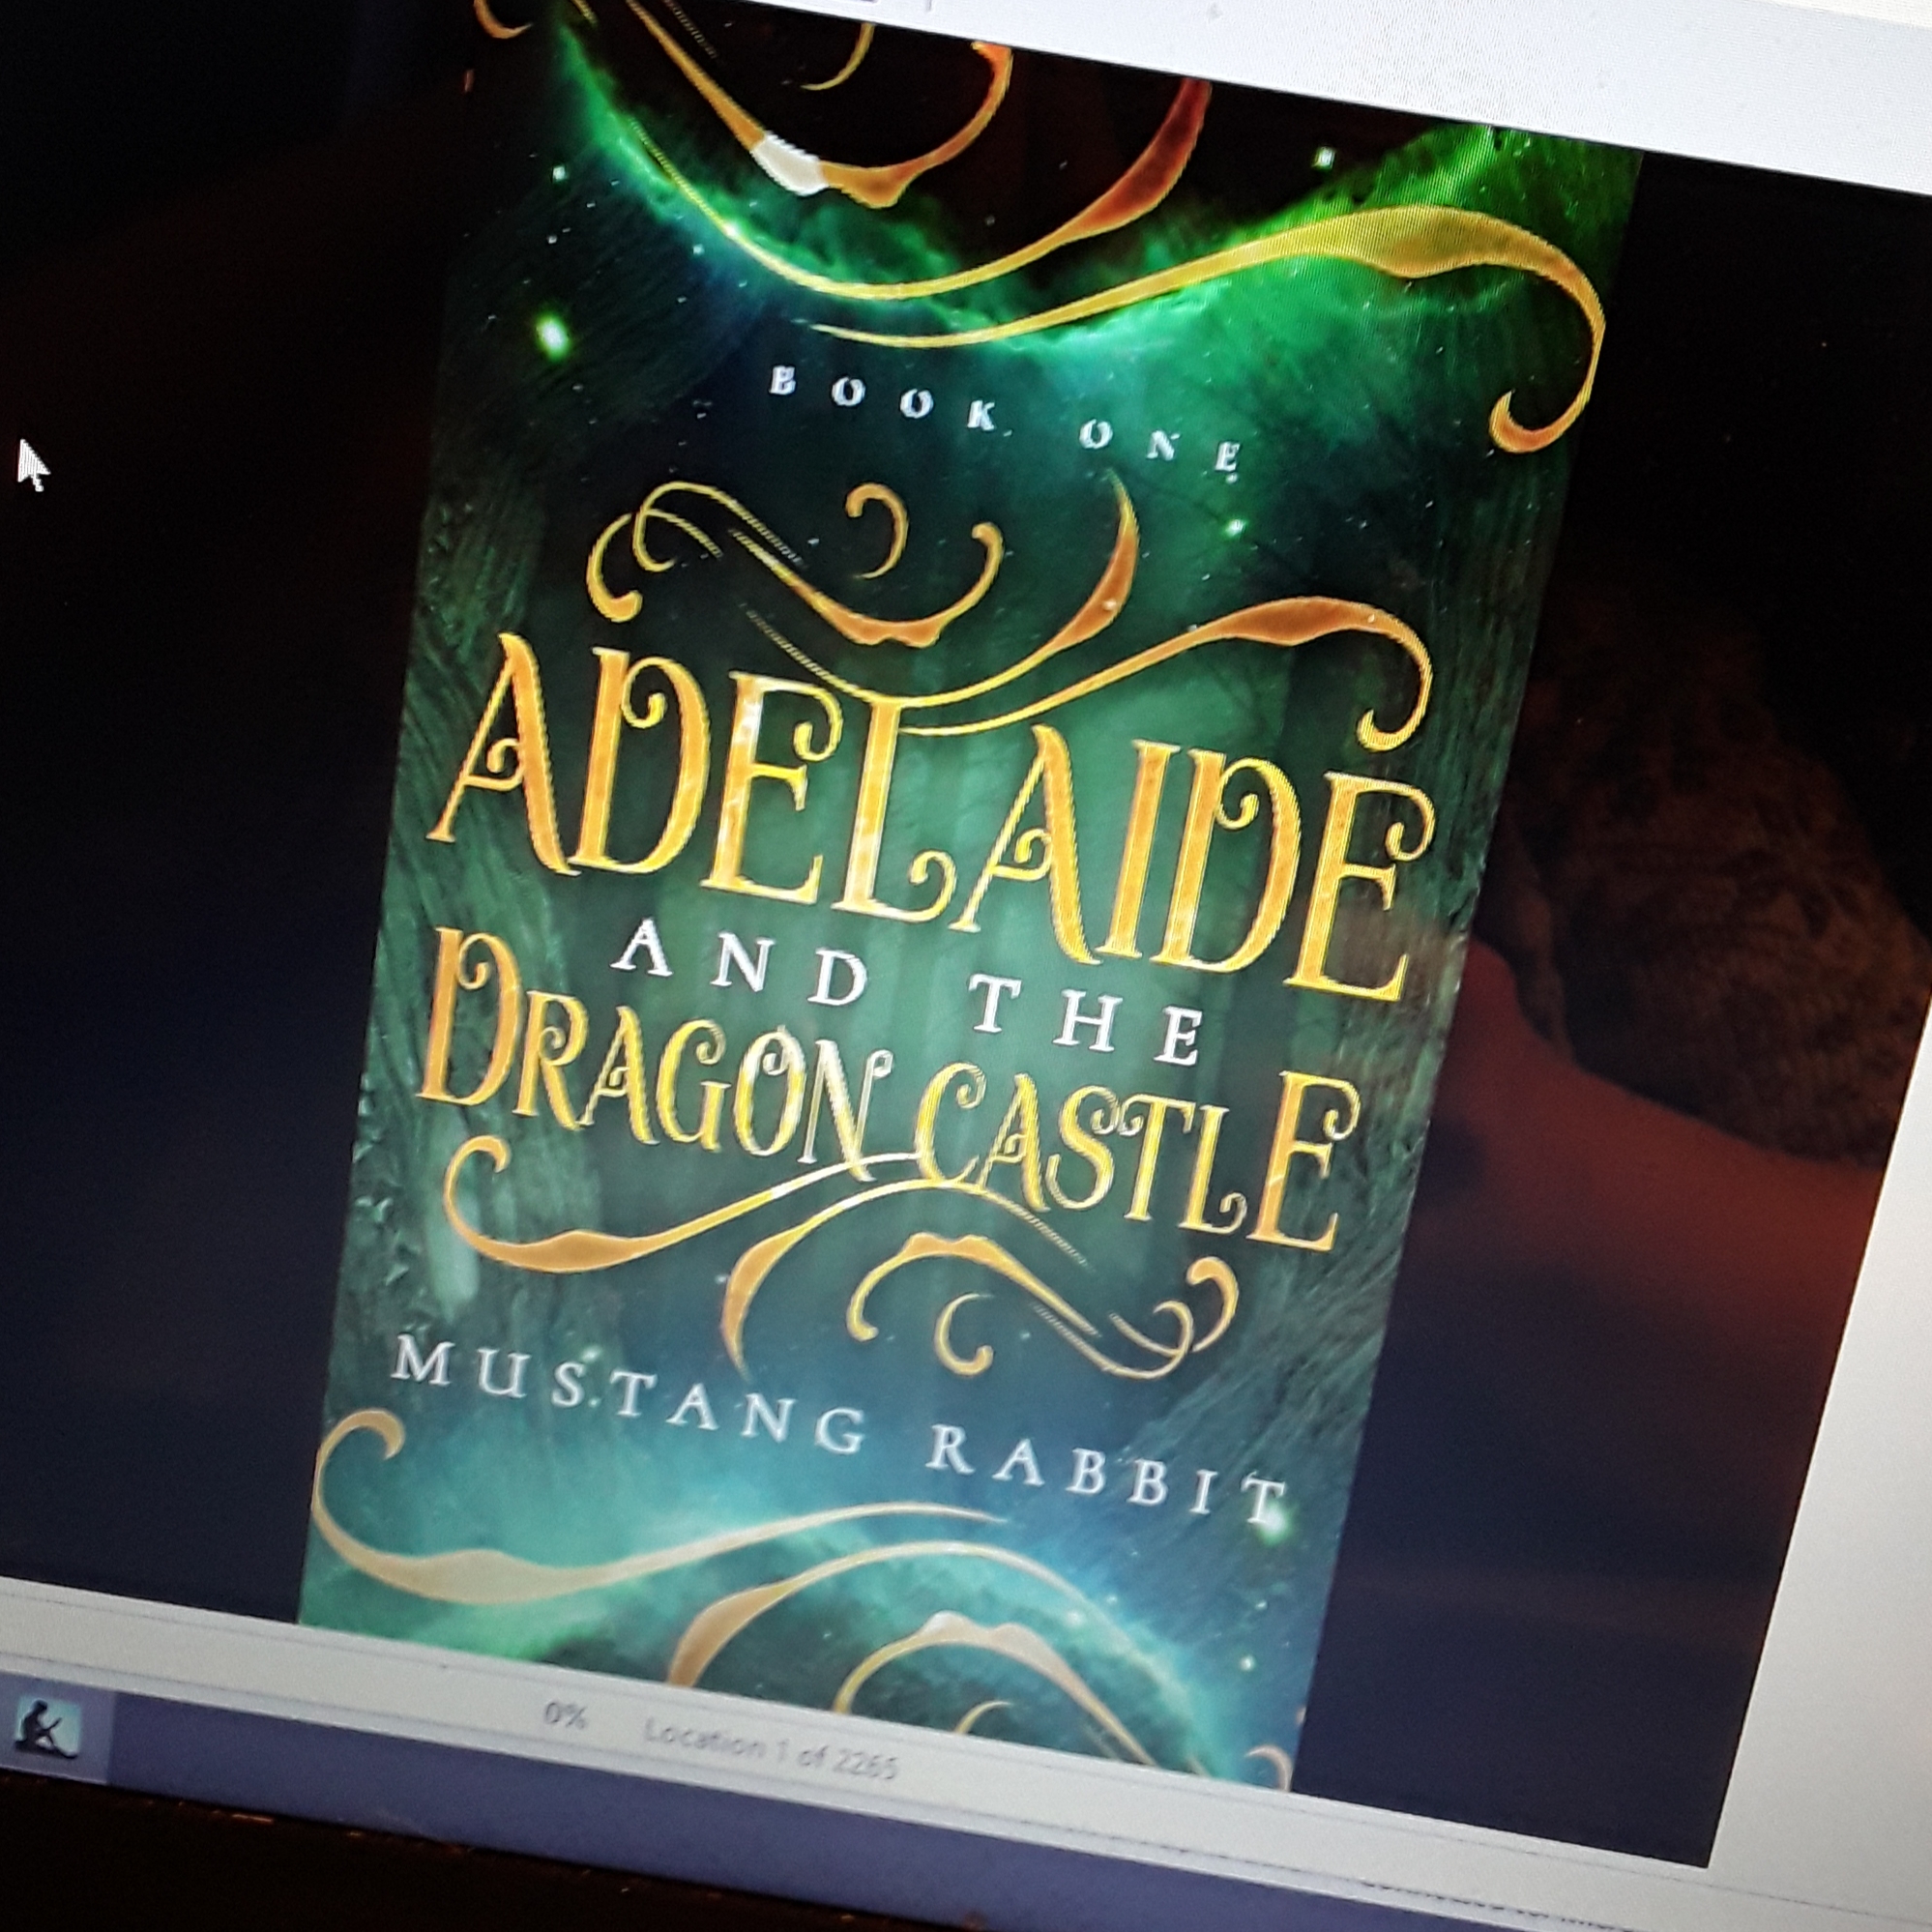 You are currently viewing Adelaide and the Dragon Castle